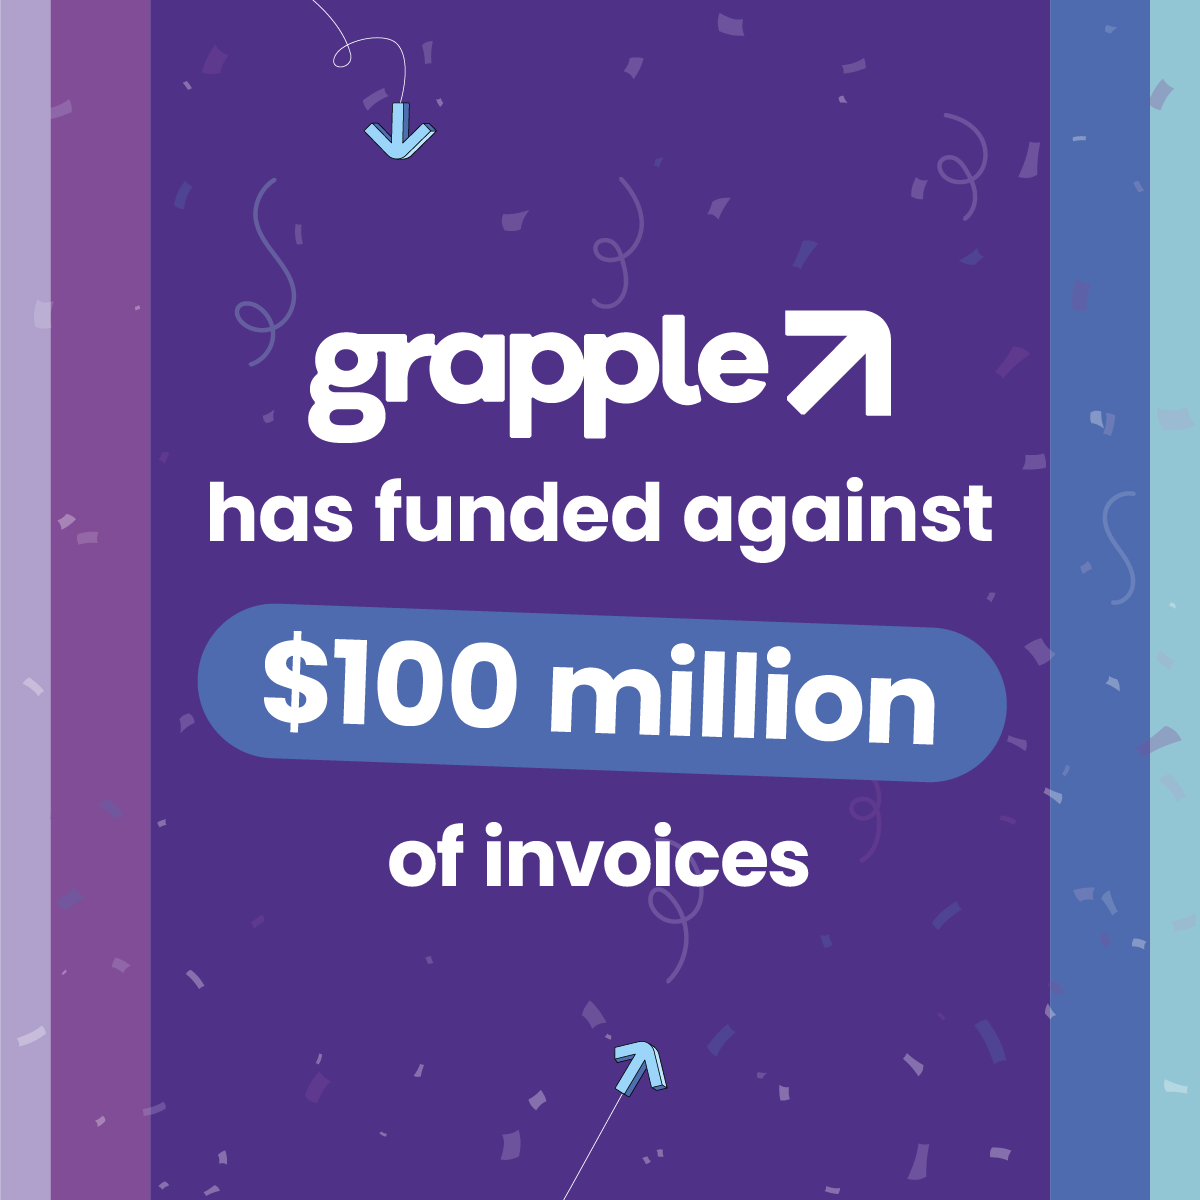 Today Grapple passed another milestone, we’ve now funded against $100million of invoices to support the growth of Aussie SMEs. This is testament to the LendTech we’ve developed in consultation with Australian businesses and the team that helped us deliver it #smelending #finance